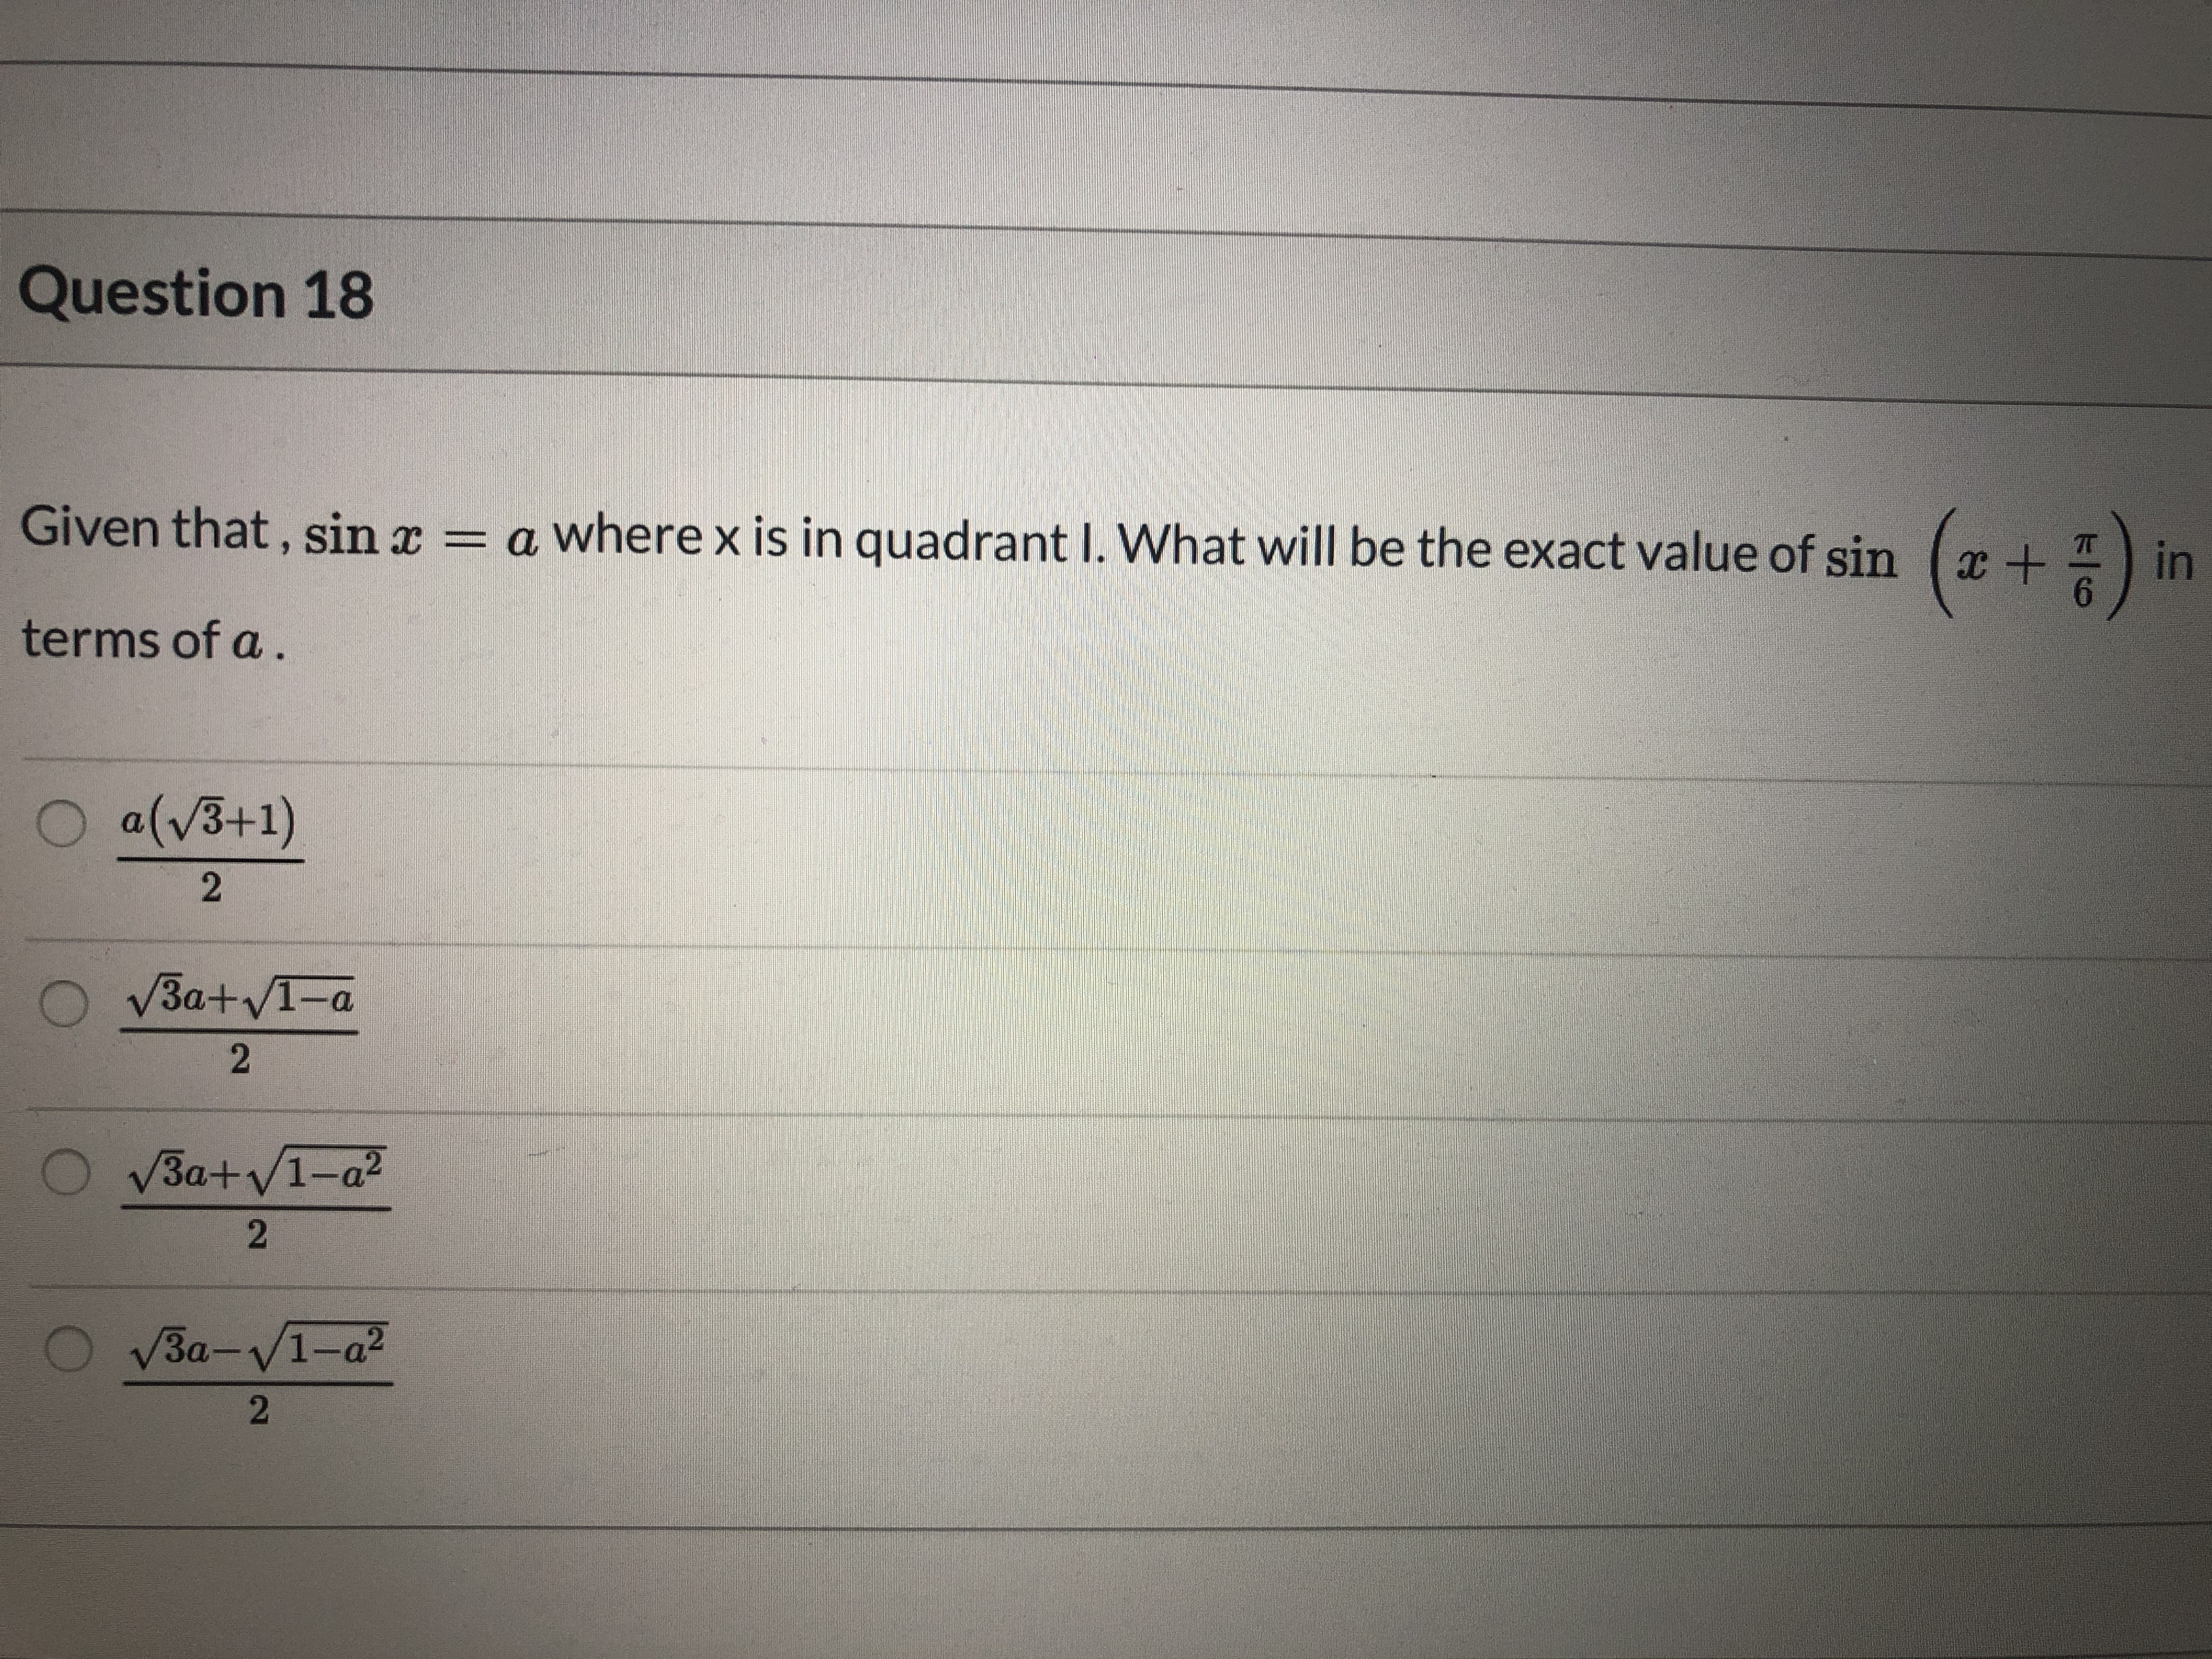 Question 18
(*+) in
Given that, sin x = a where x is in quadrant I. What will be the exact value of sin
6.
terms of a.
a(v3+1)
V3a+VI-a
V3a+V1-a?
УЗа-у1-а?
2]
